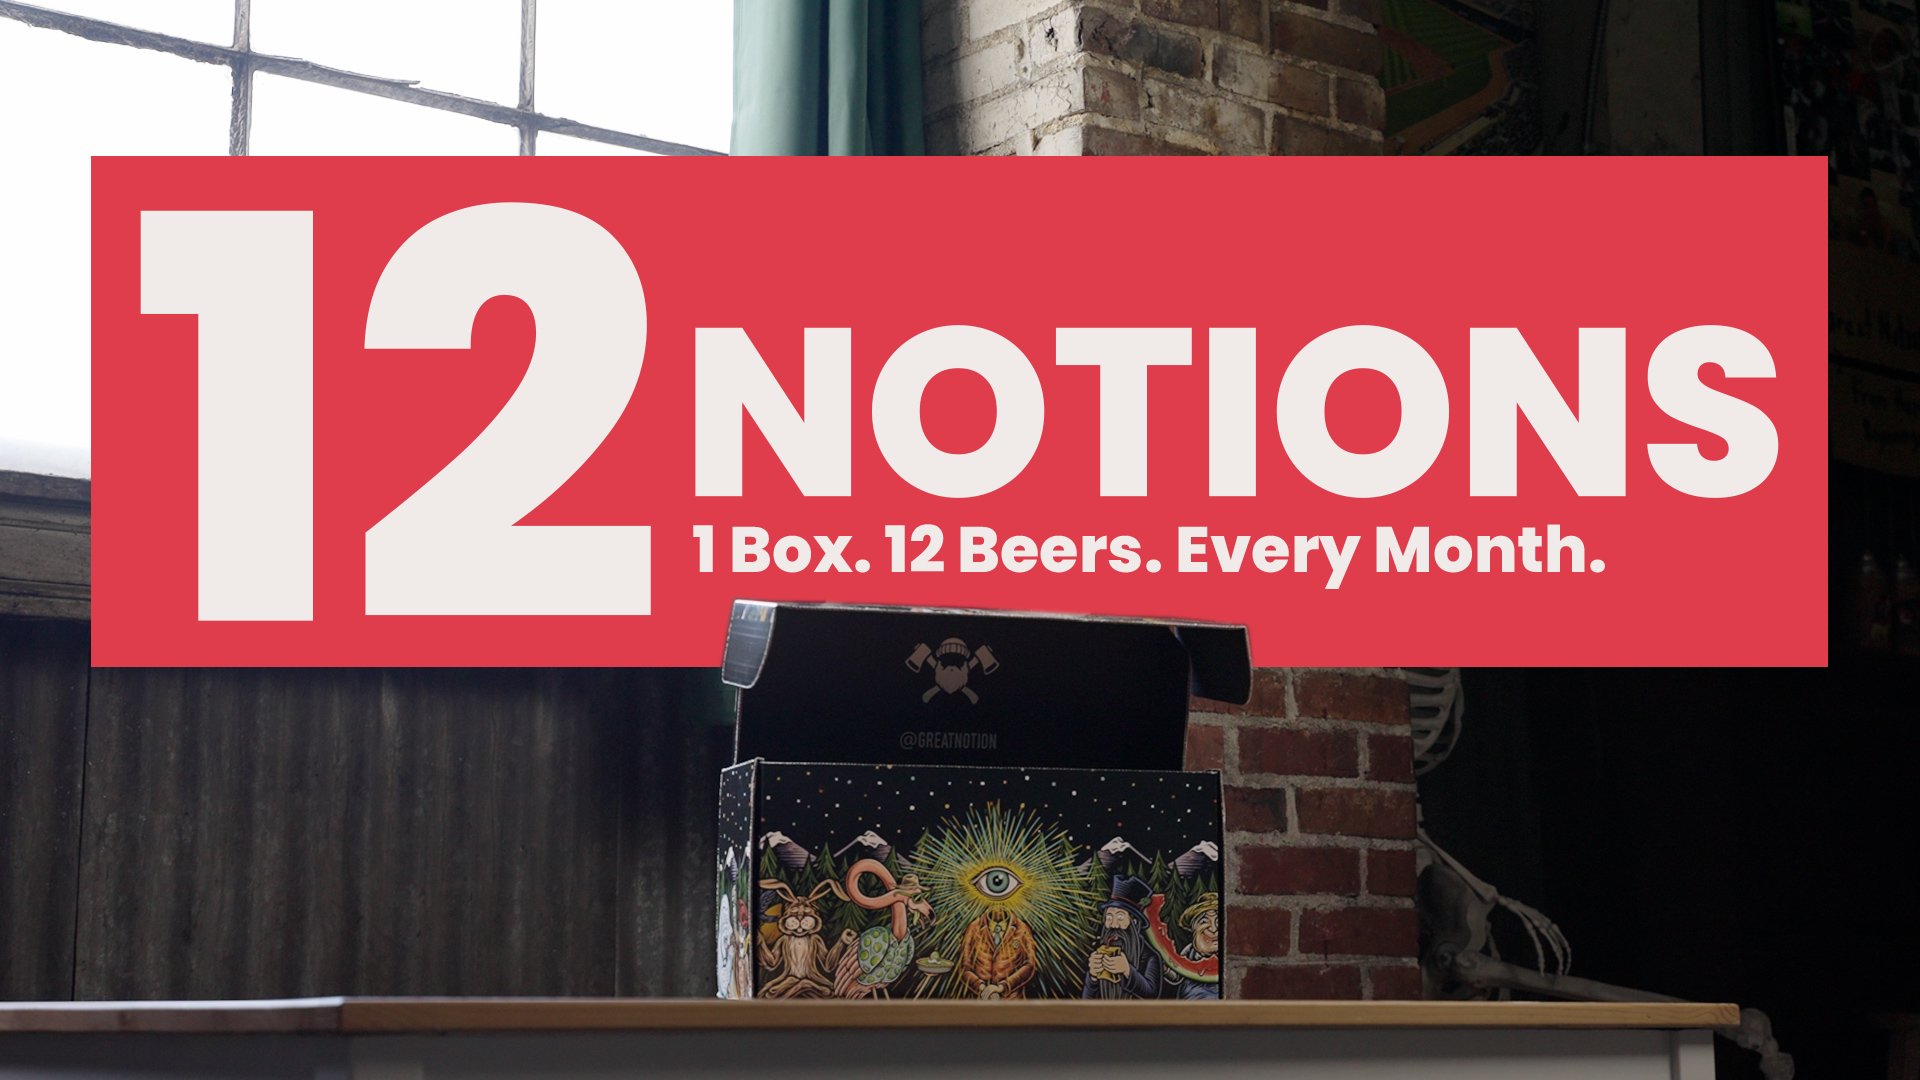 12 Notions